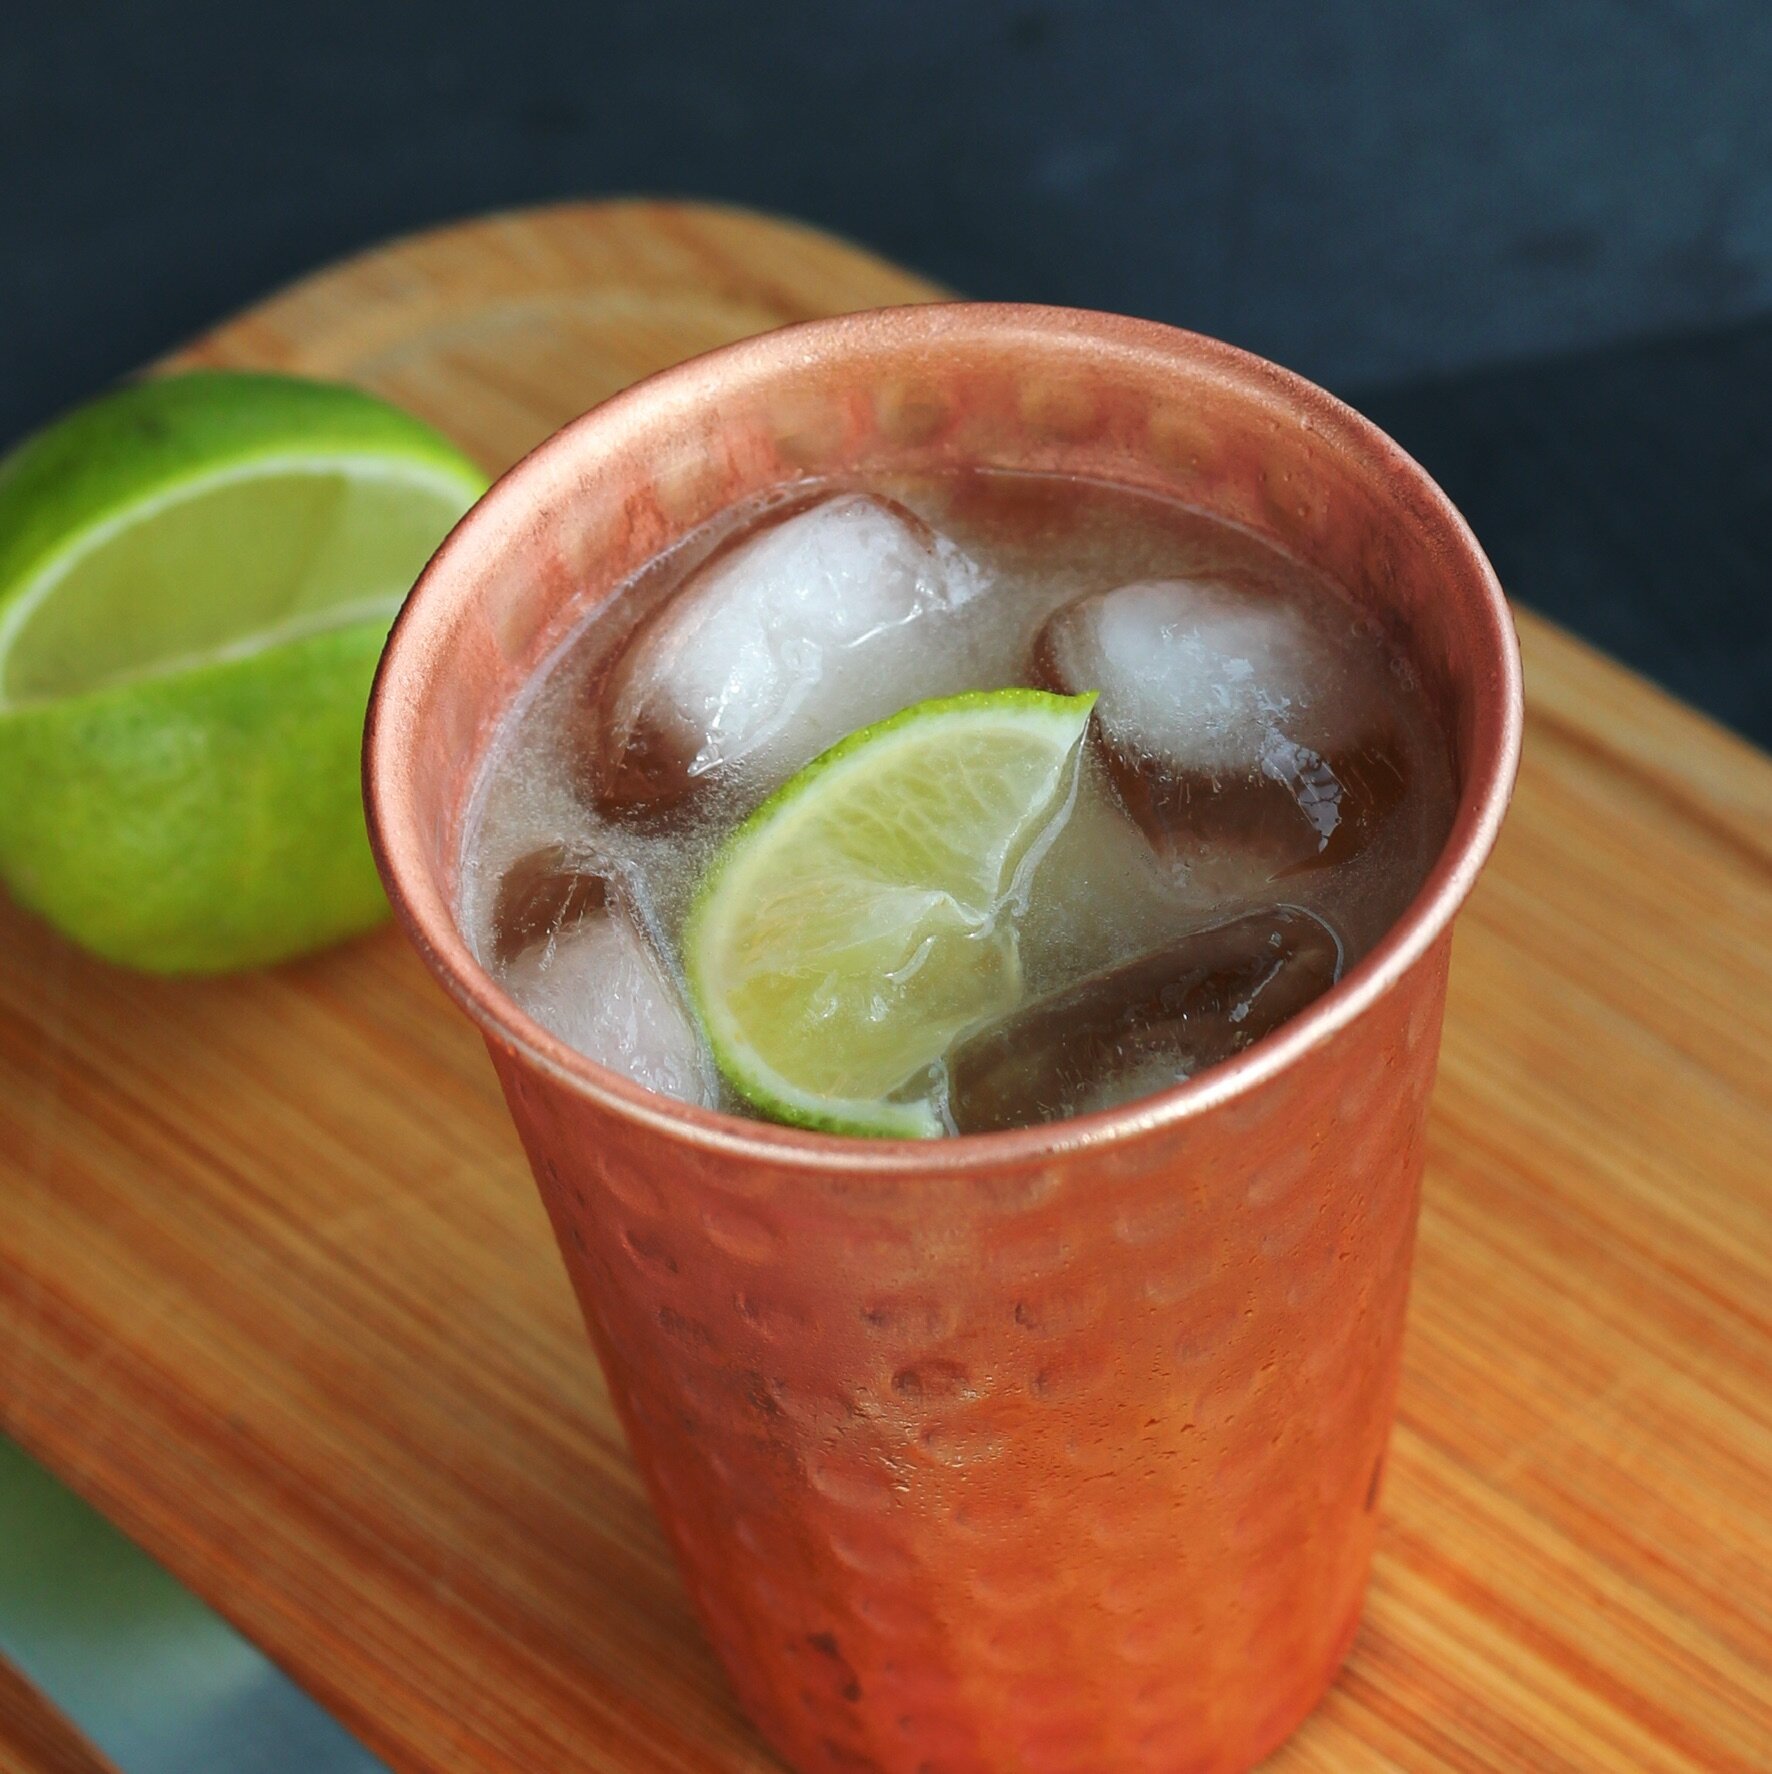 Moscow Mule Cocktail Recipe Allrecipes,Pet Hedgehog Baby